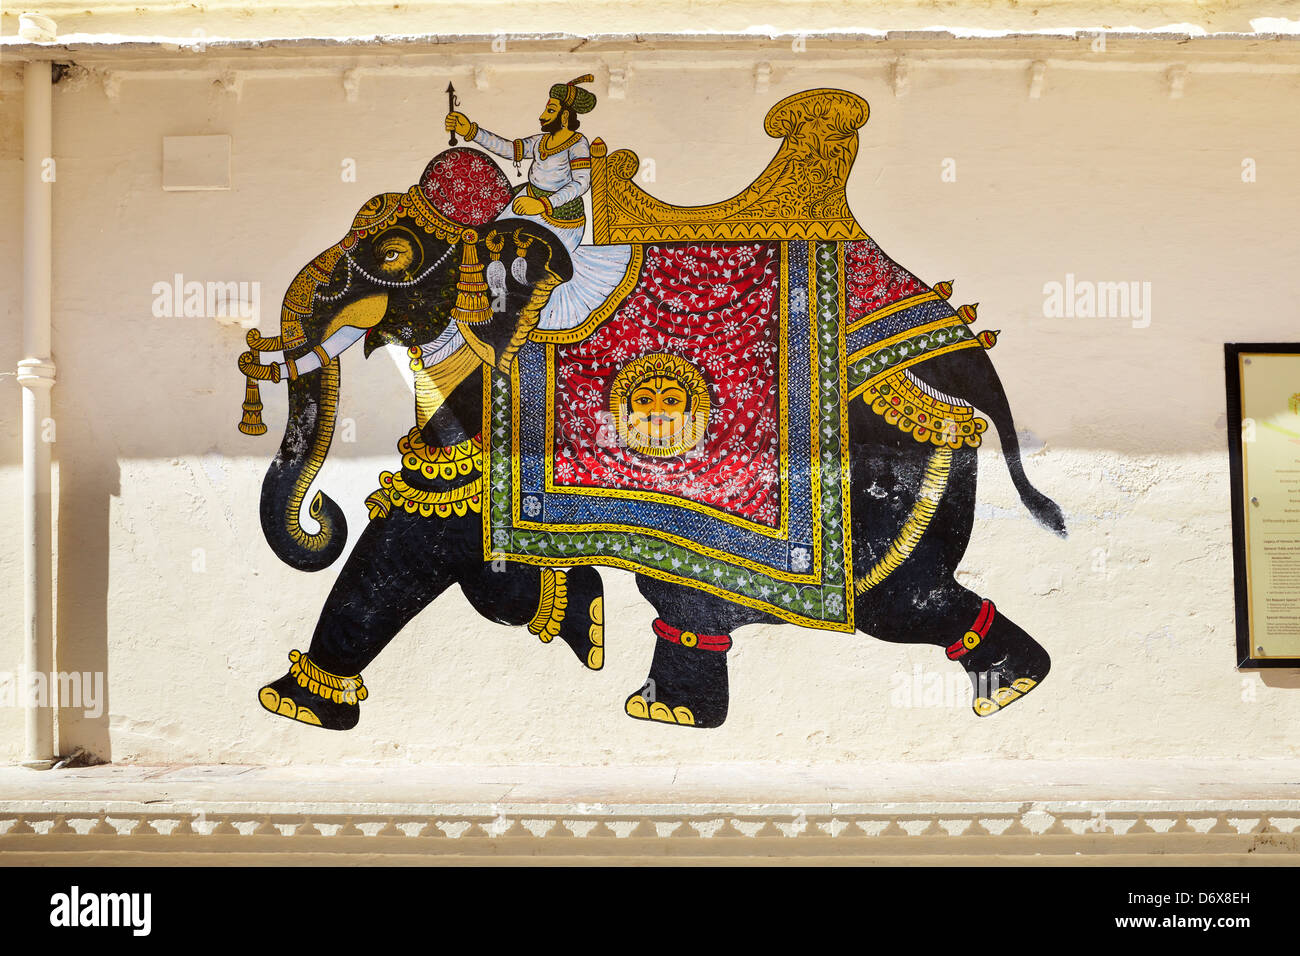 Elephant art painting on the wall of the Udaipur City Palace, Udaipur, Rajasthan, India Stock Photo